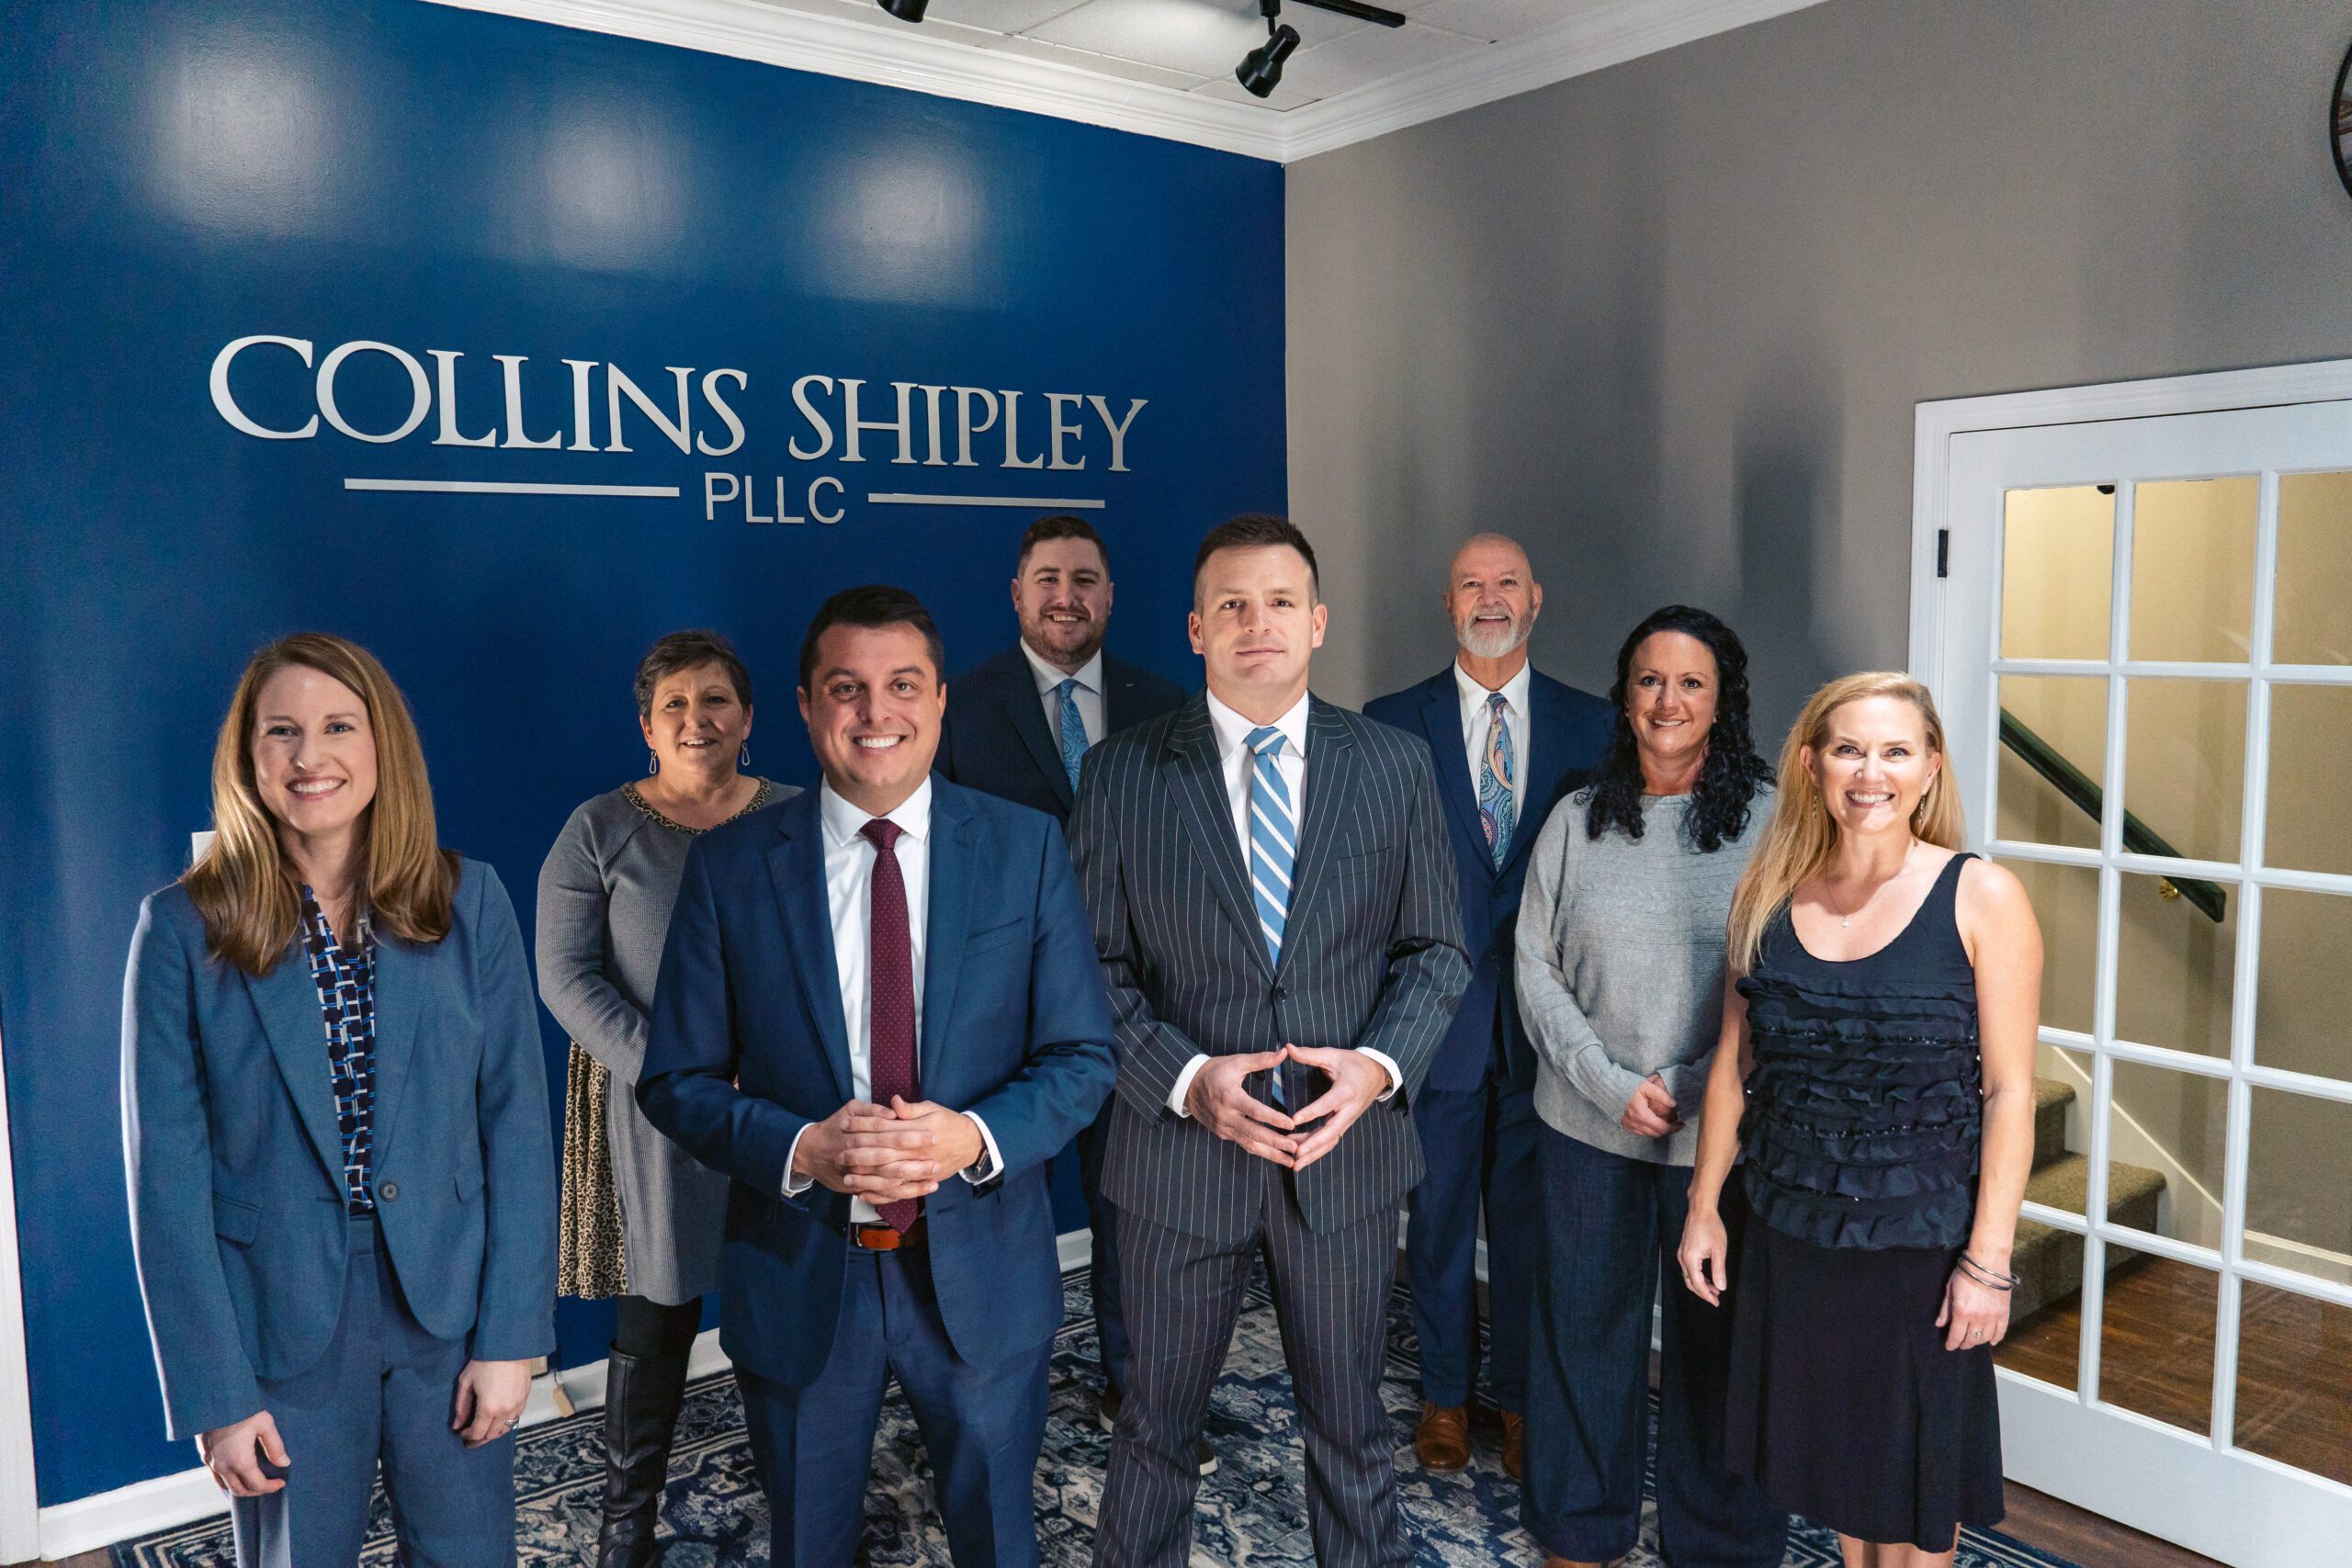 Legal team from Collins Shipley, PLLC